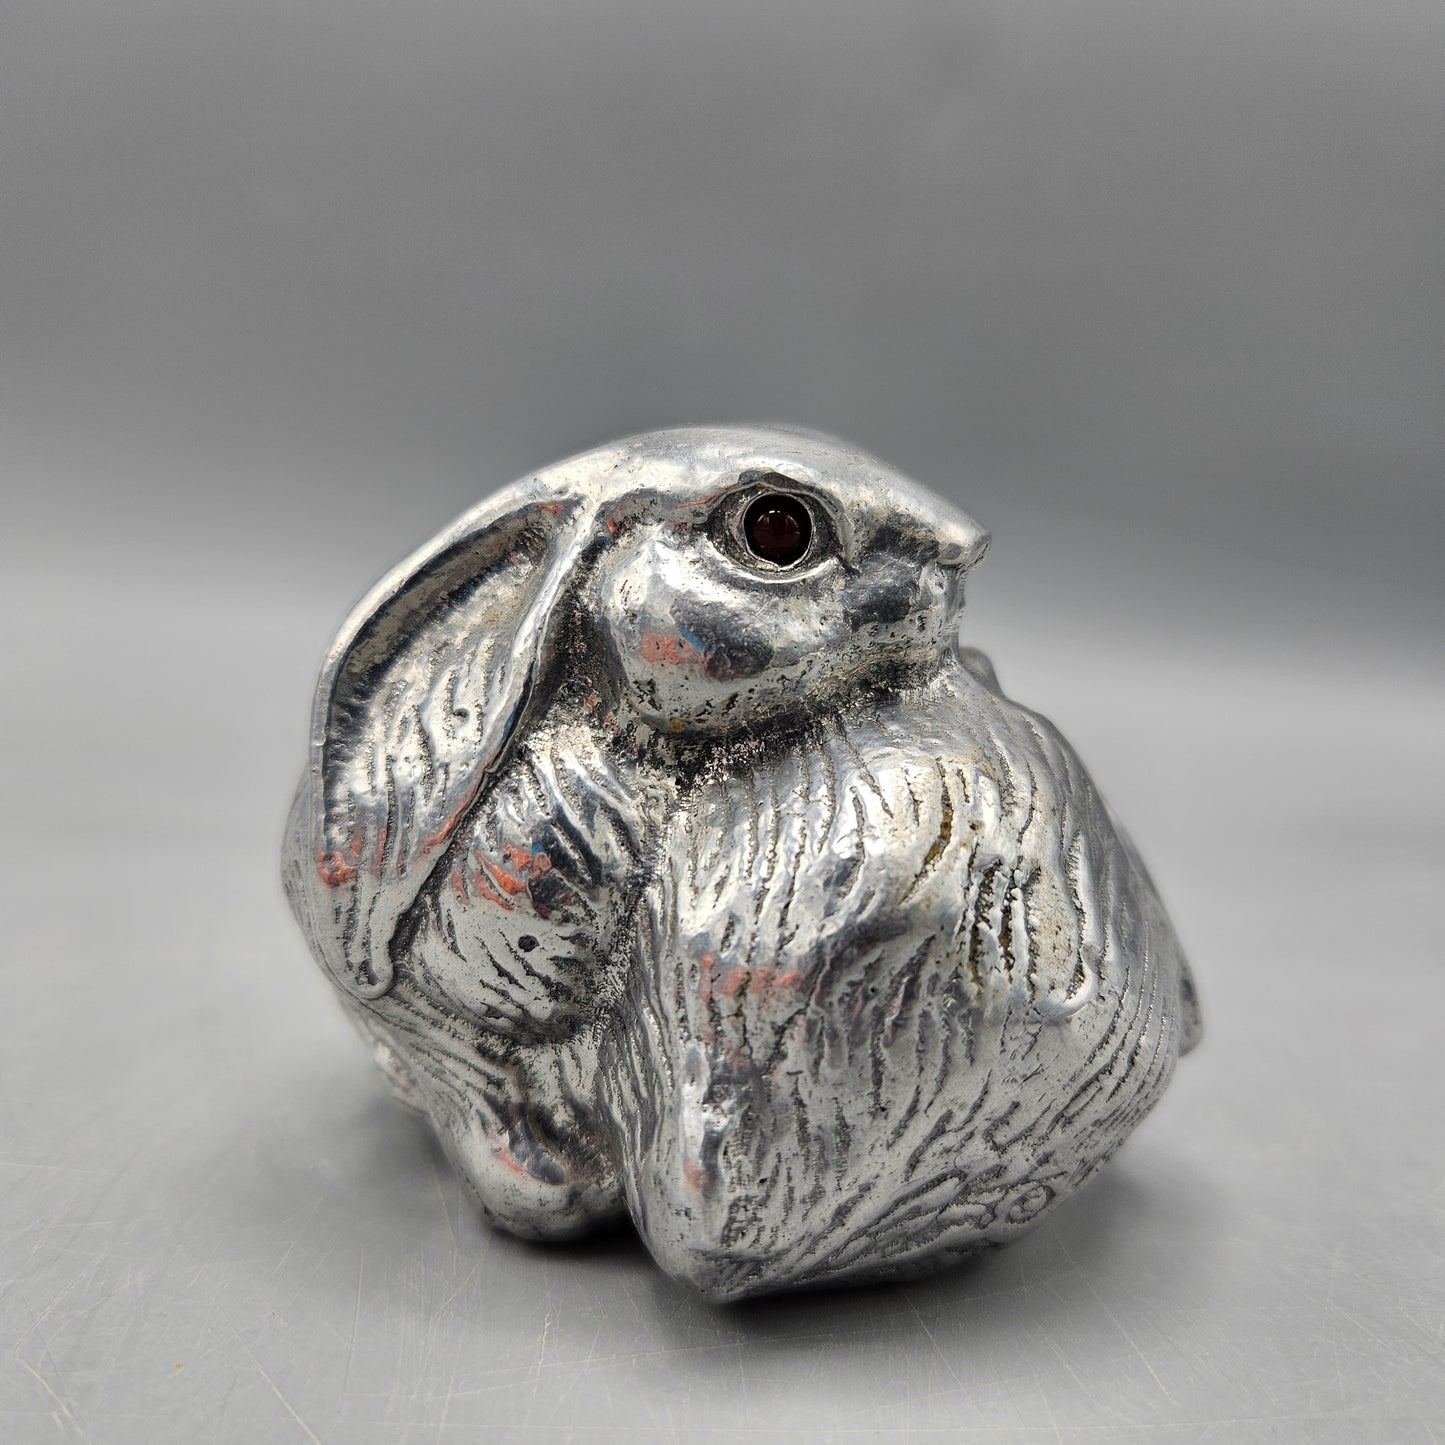 Vintage Silver 1992 Arthur Court Pair of Rabbits Snuggling Paperweight Figurine